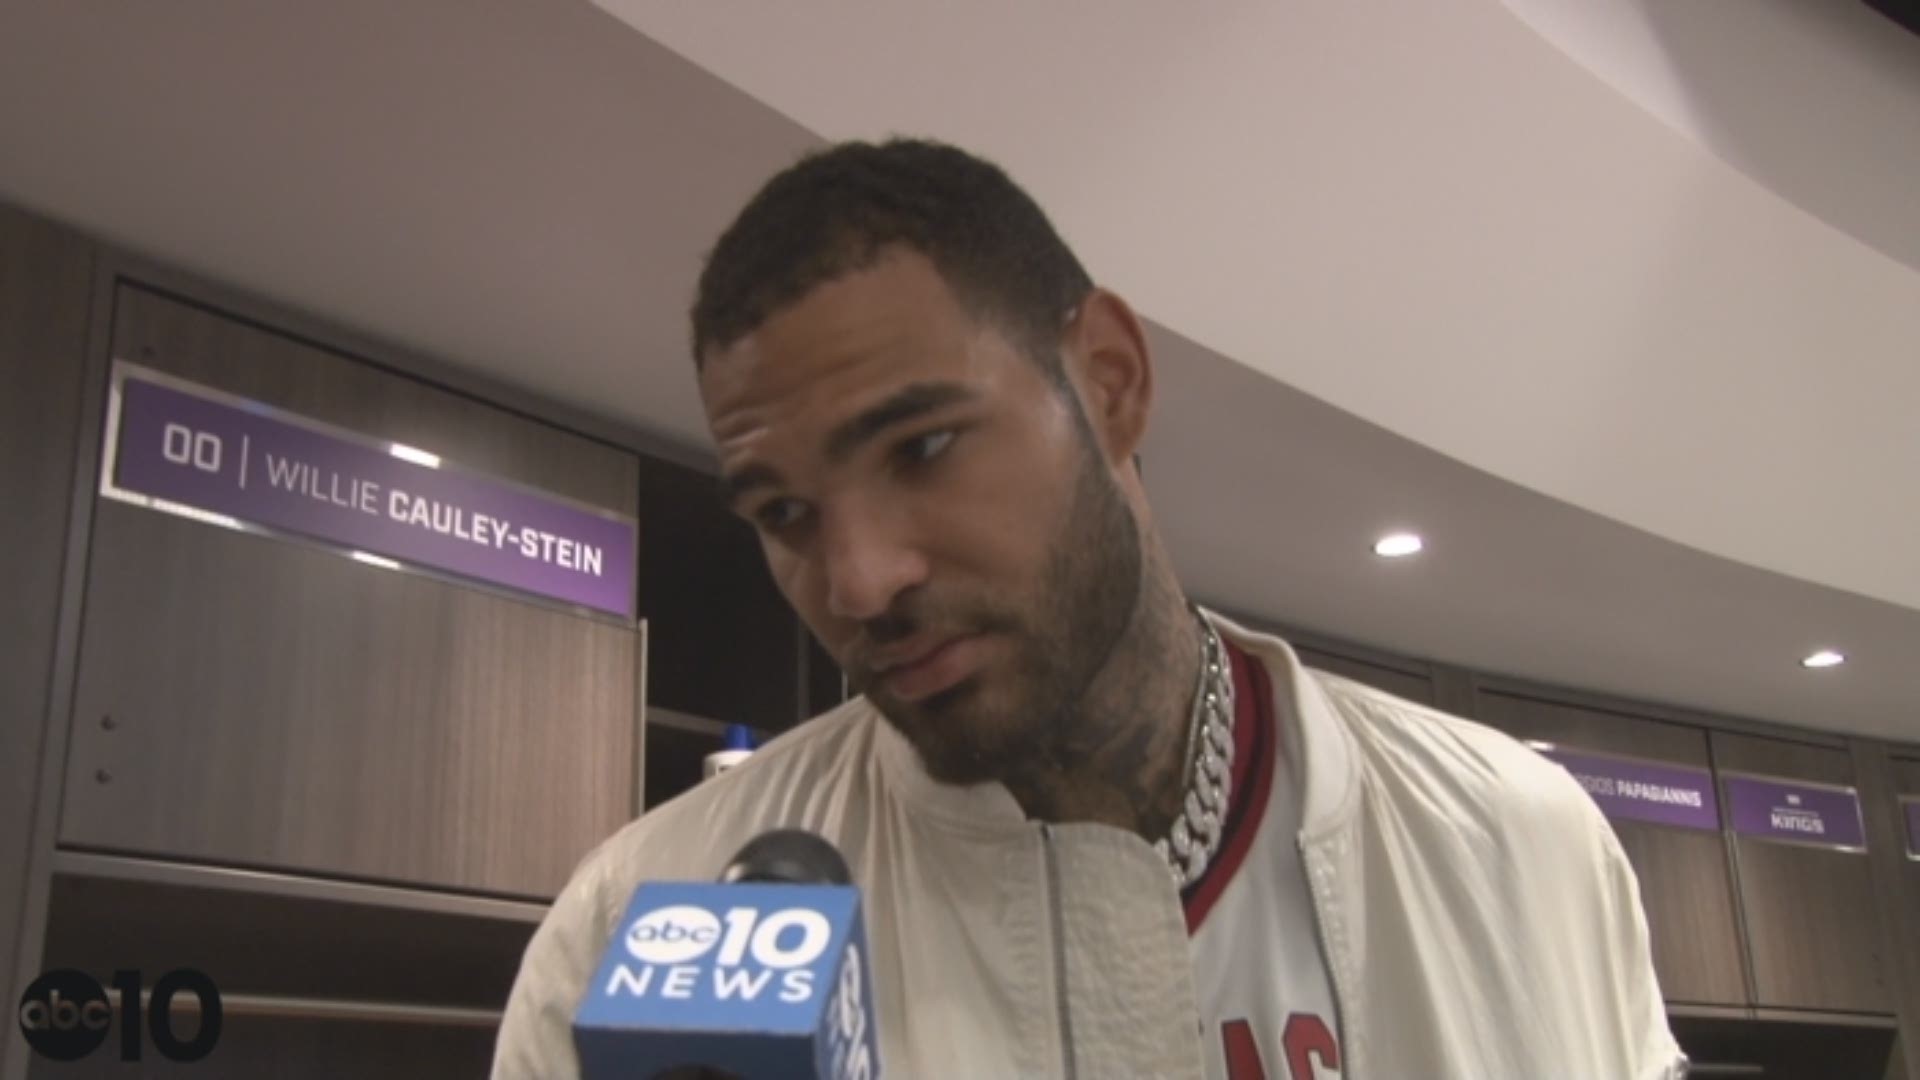 Kings center Willie Cauley-Stein talks about his season scoring high performance in Wednesday's win over the Lakers, and his thought process when it comes to being active around the rim.